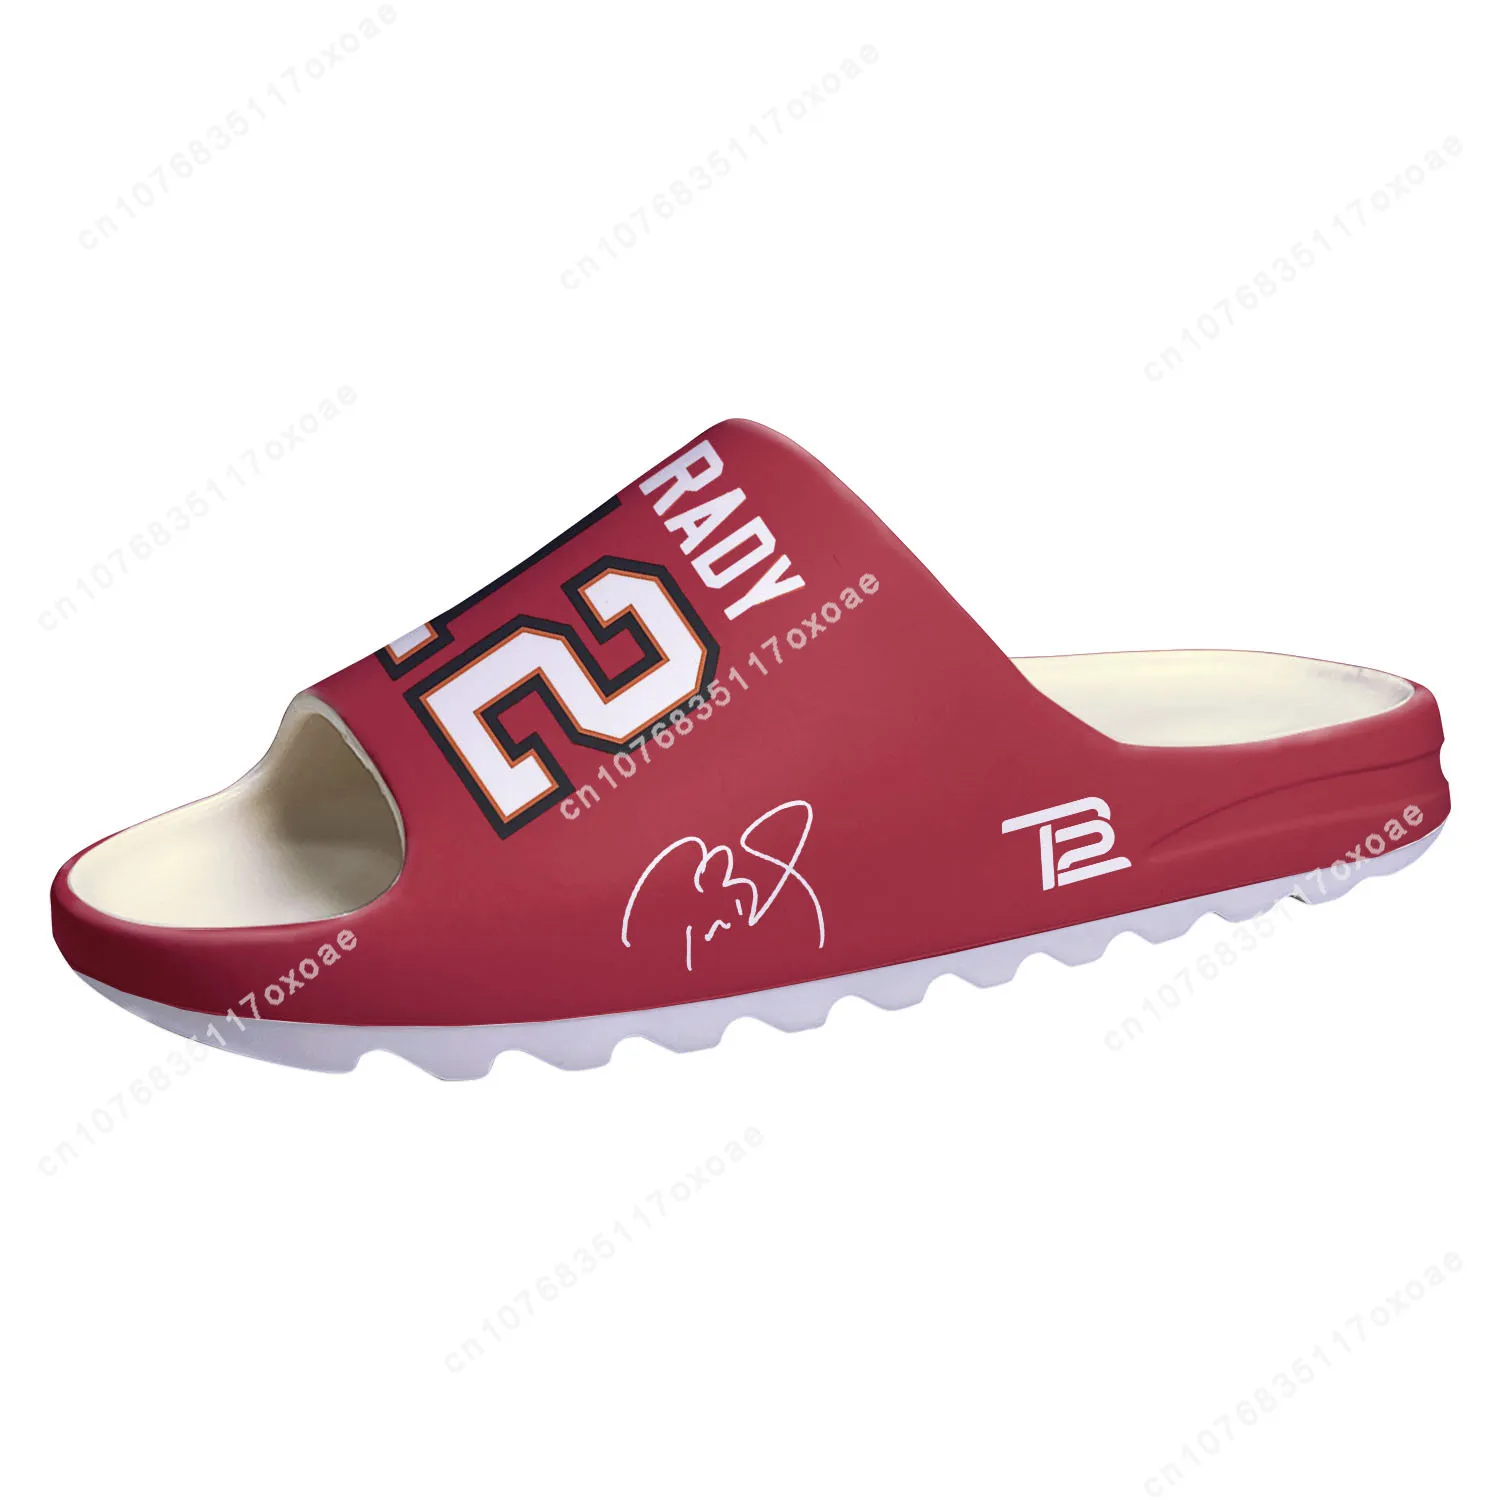 

Tom Brady Football American Soft Sole Sllipers Home Clogs USA Goat NO 12 Step On Water Shoes Mens Womens Teenager Custom Sandals